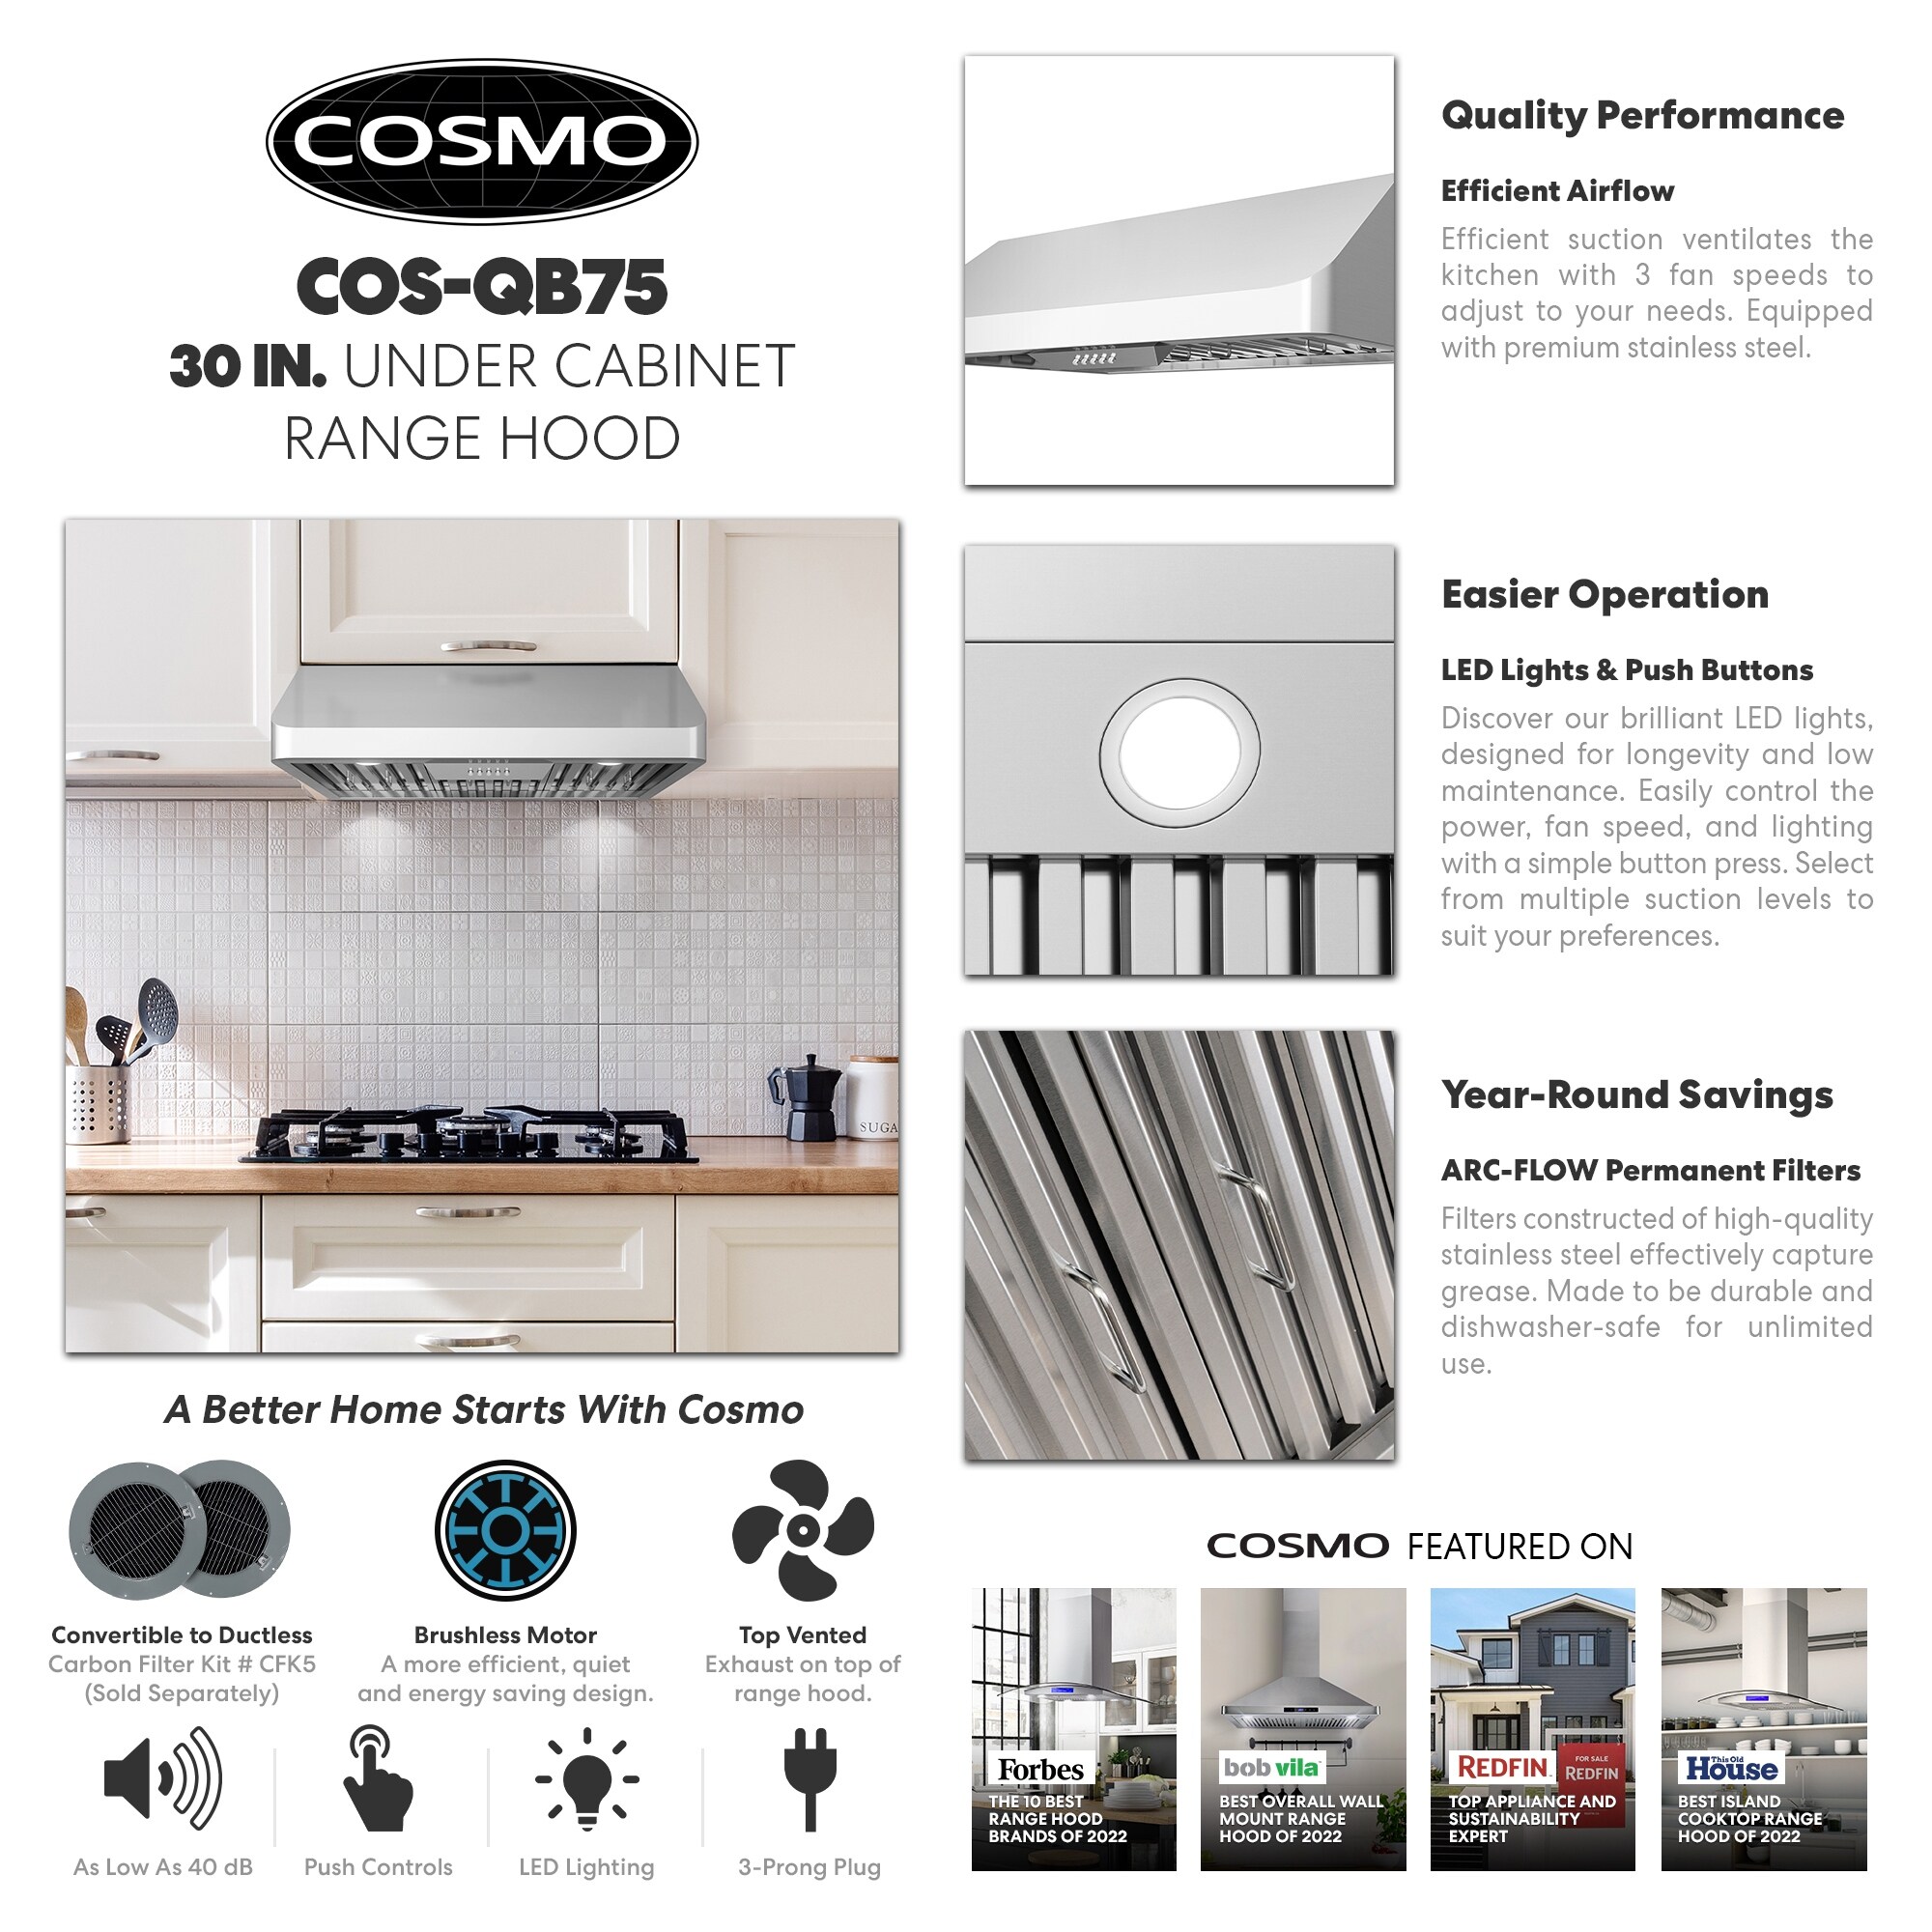 Cosmo 30 inch Wall Mount Range Hood with Ducted Convertible